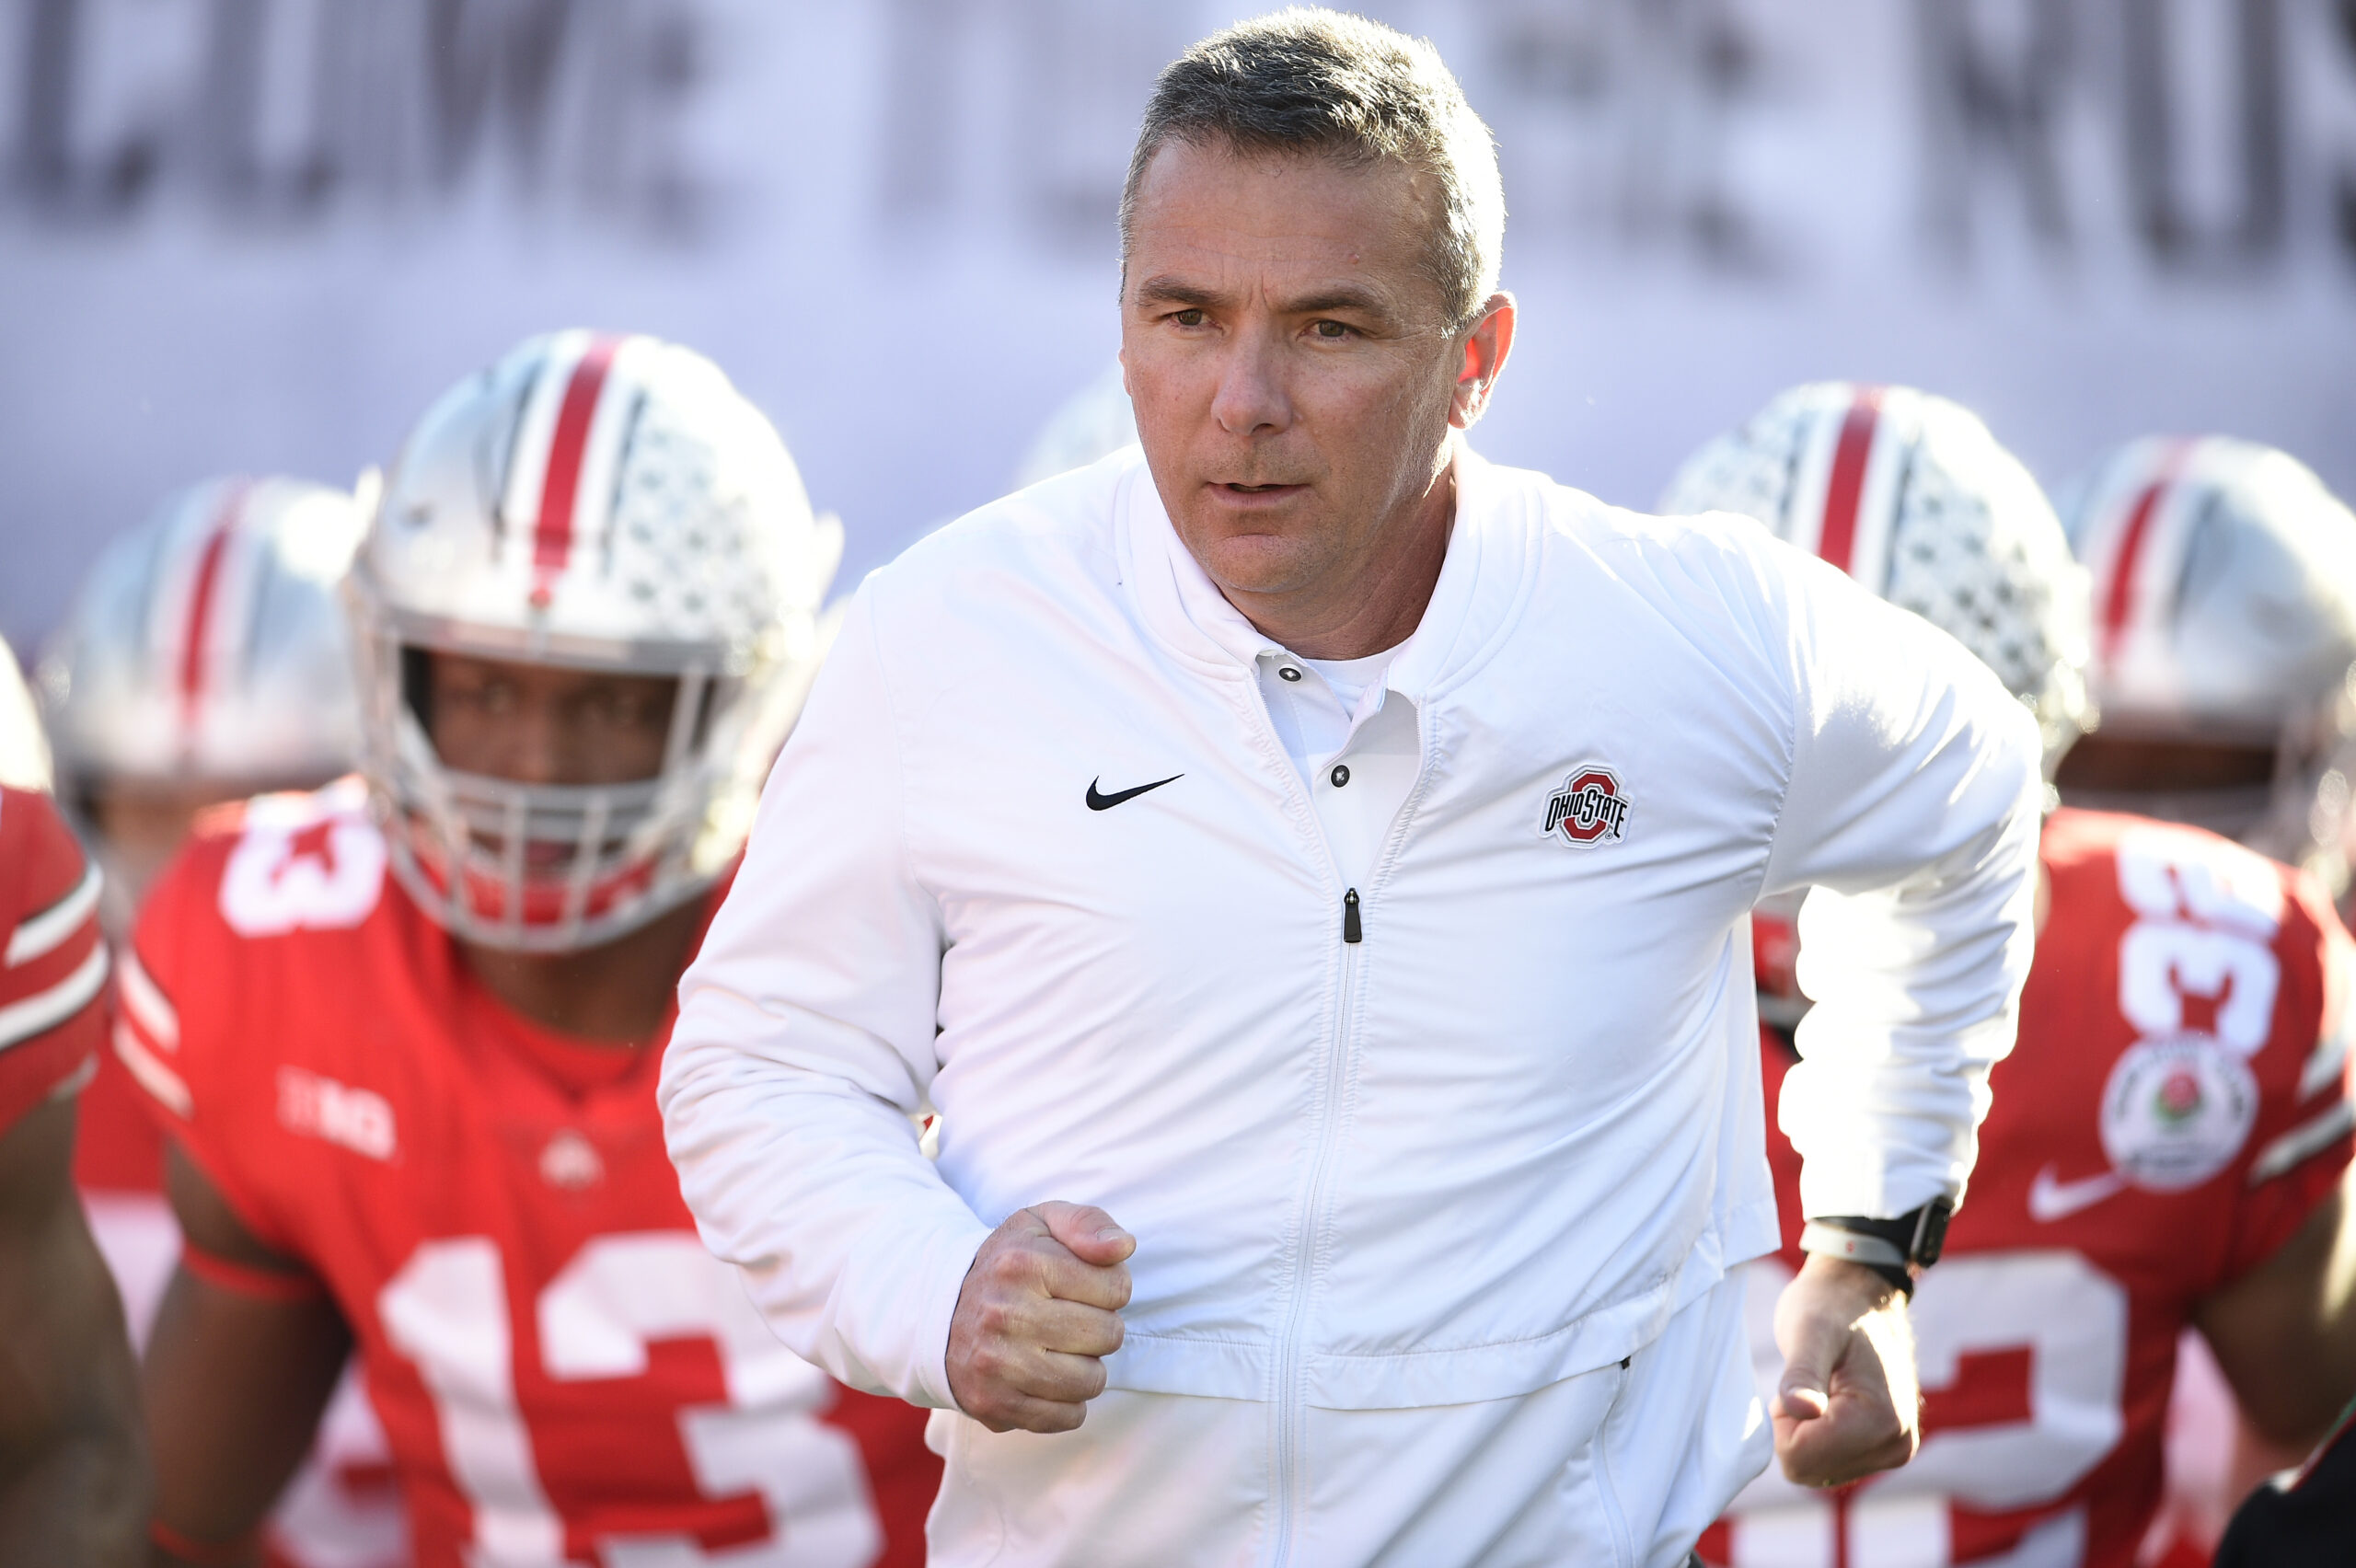 Urban Meyer has an interesting pick for a statue at Ohio Stadium